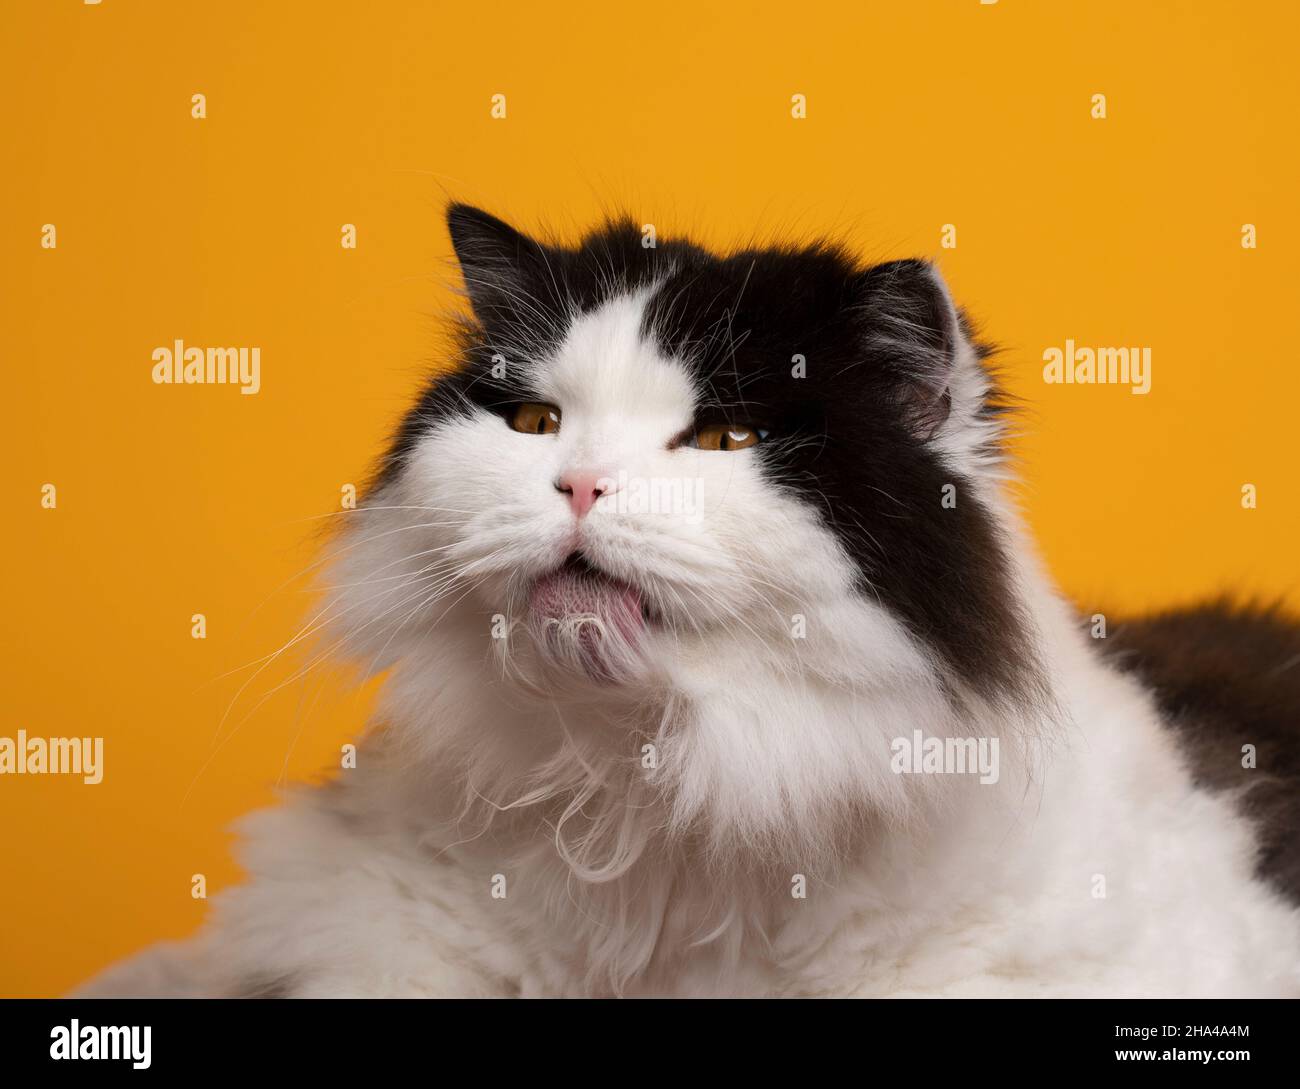 black and white british longhair cat grooming licking fur on yellow background making silly face Stock Photo